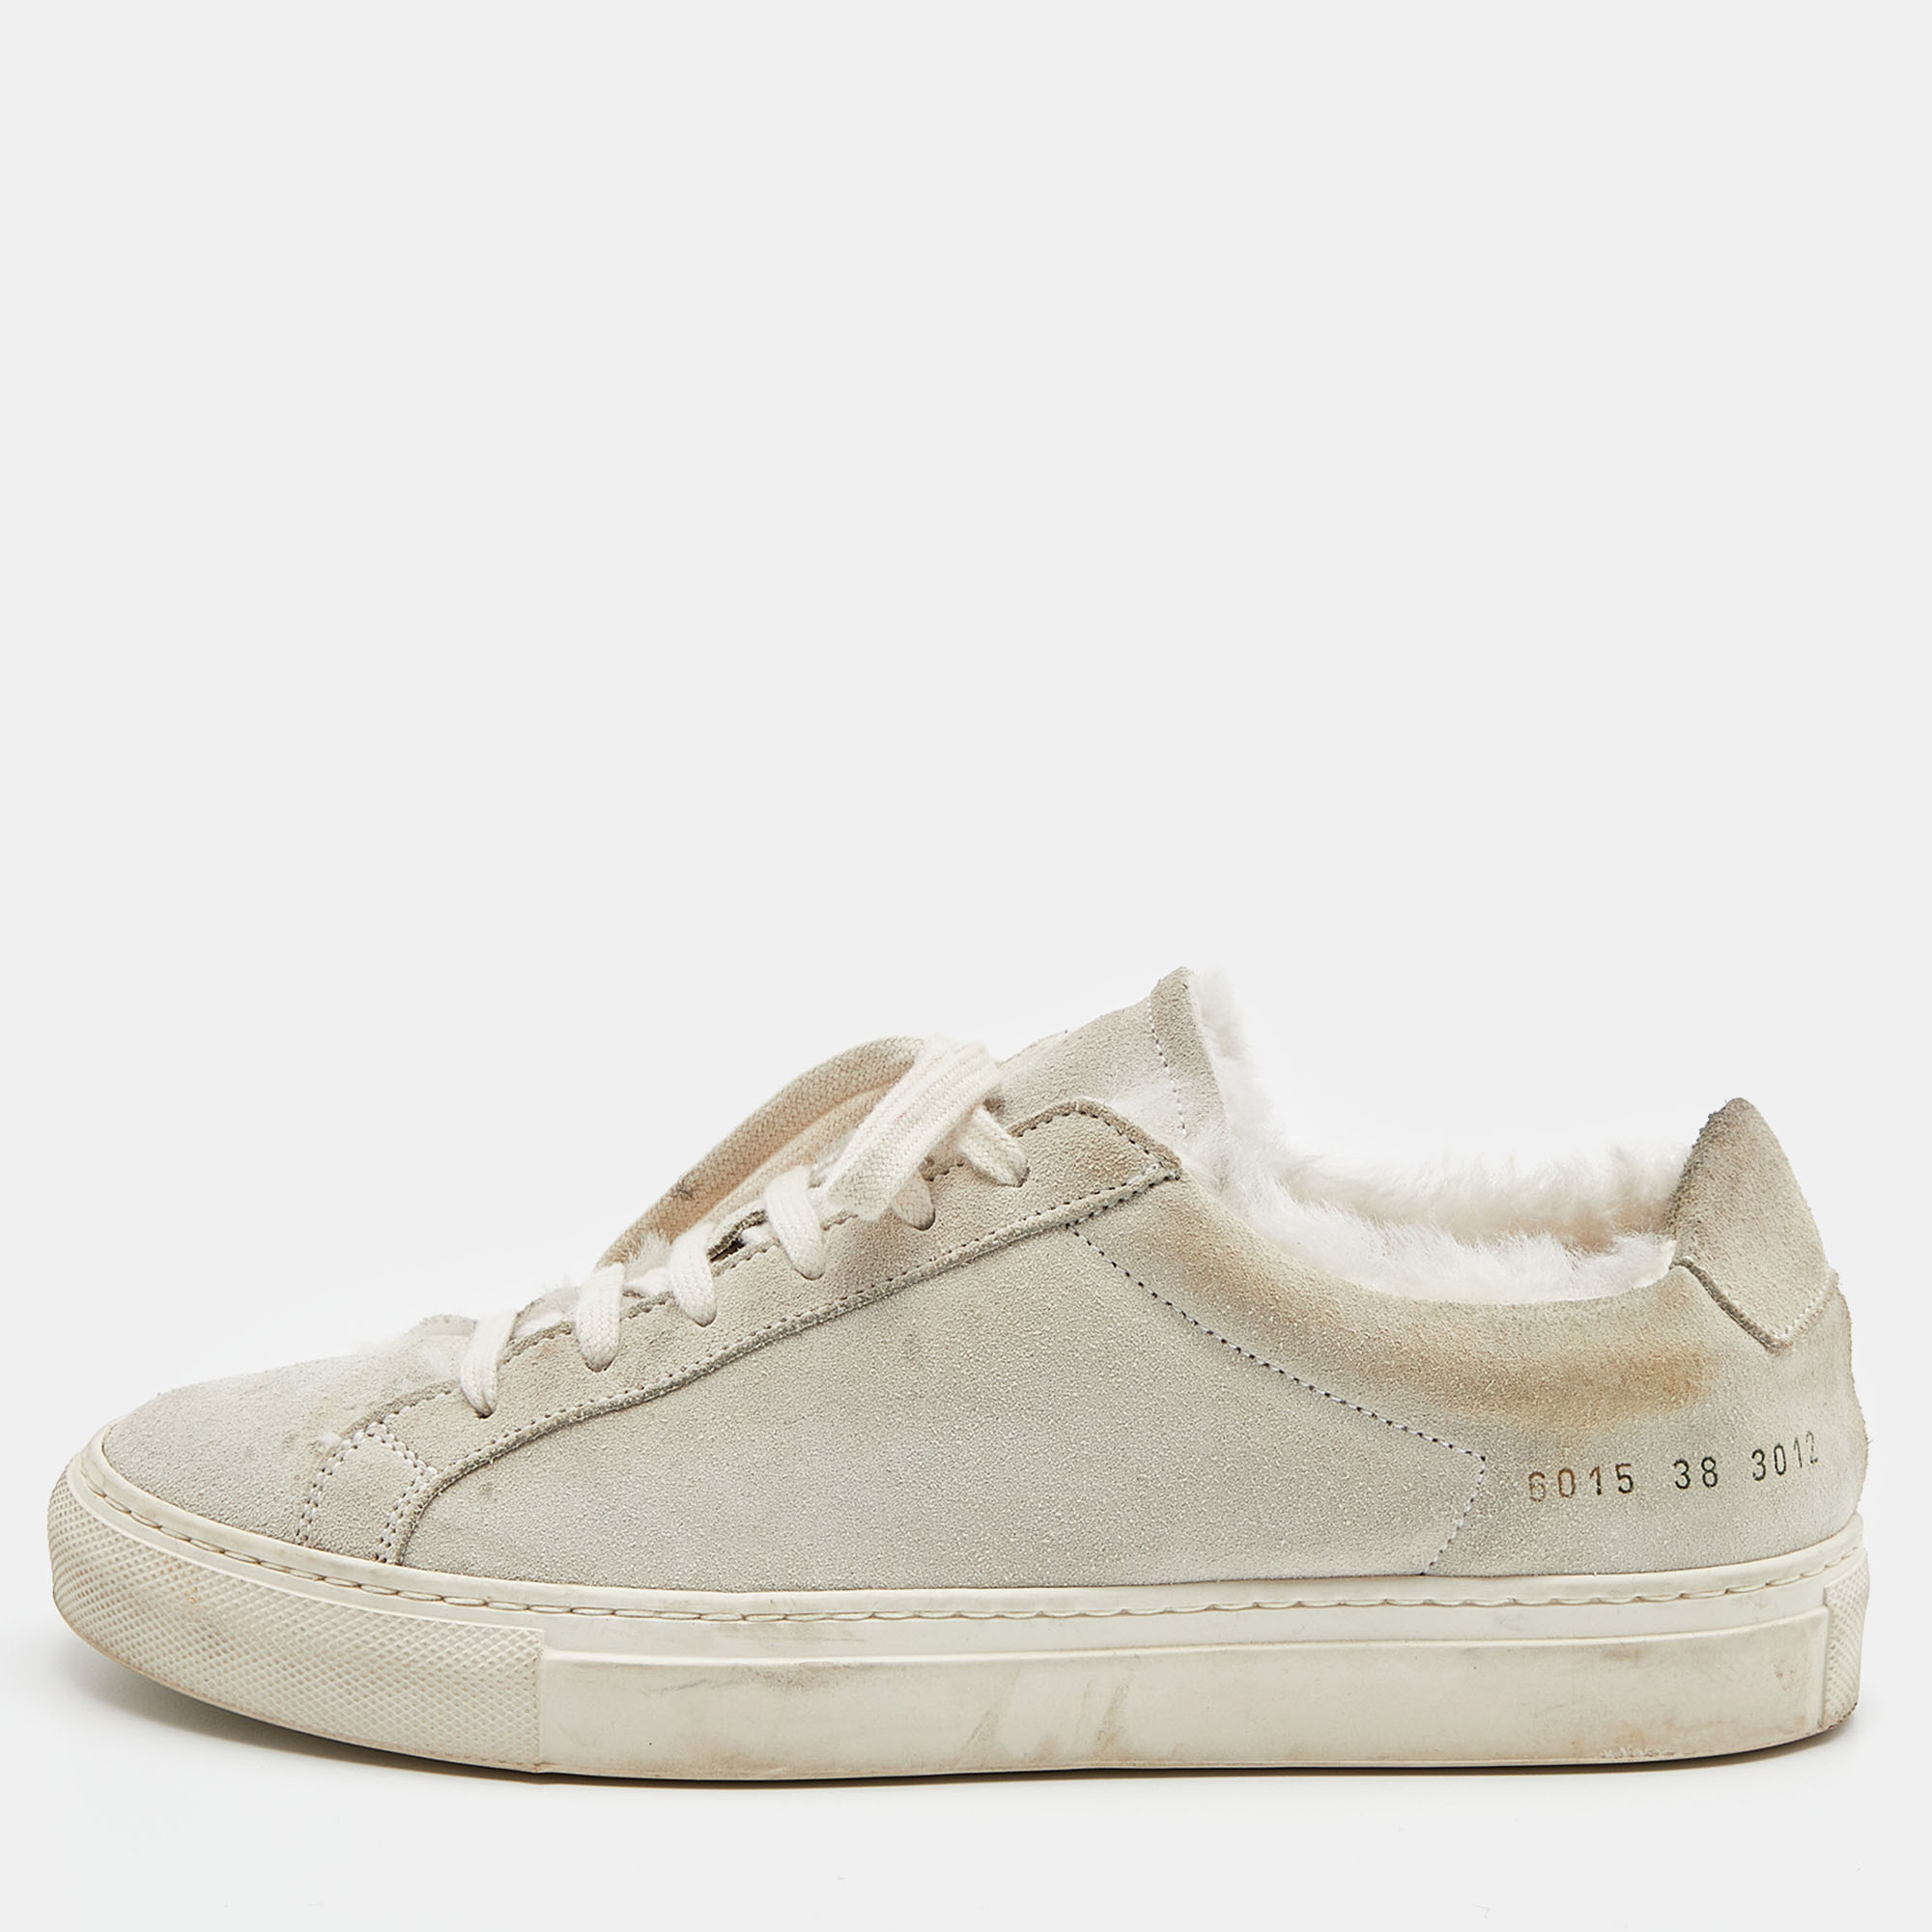 Common Projects brings you these super stylish Achilles sneakers to elevate your appearance They are crafted using grey suede on the exterior. They exhibit lace up fastenings on the vamps. Walk with style and confidence in these sneakers